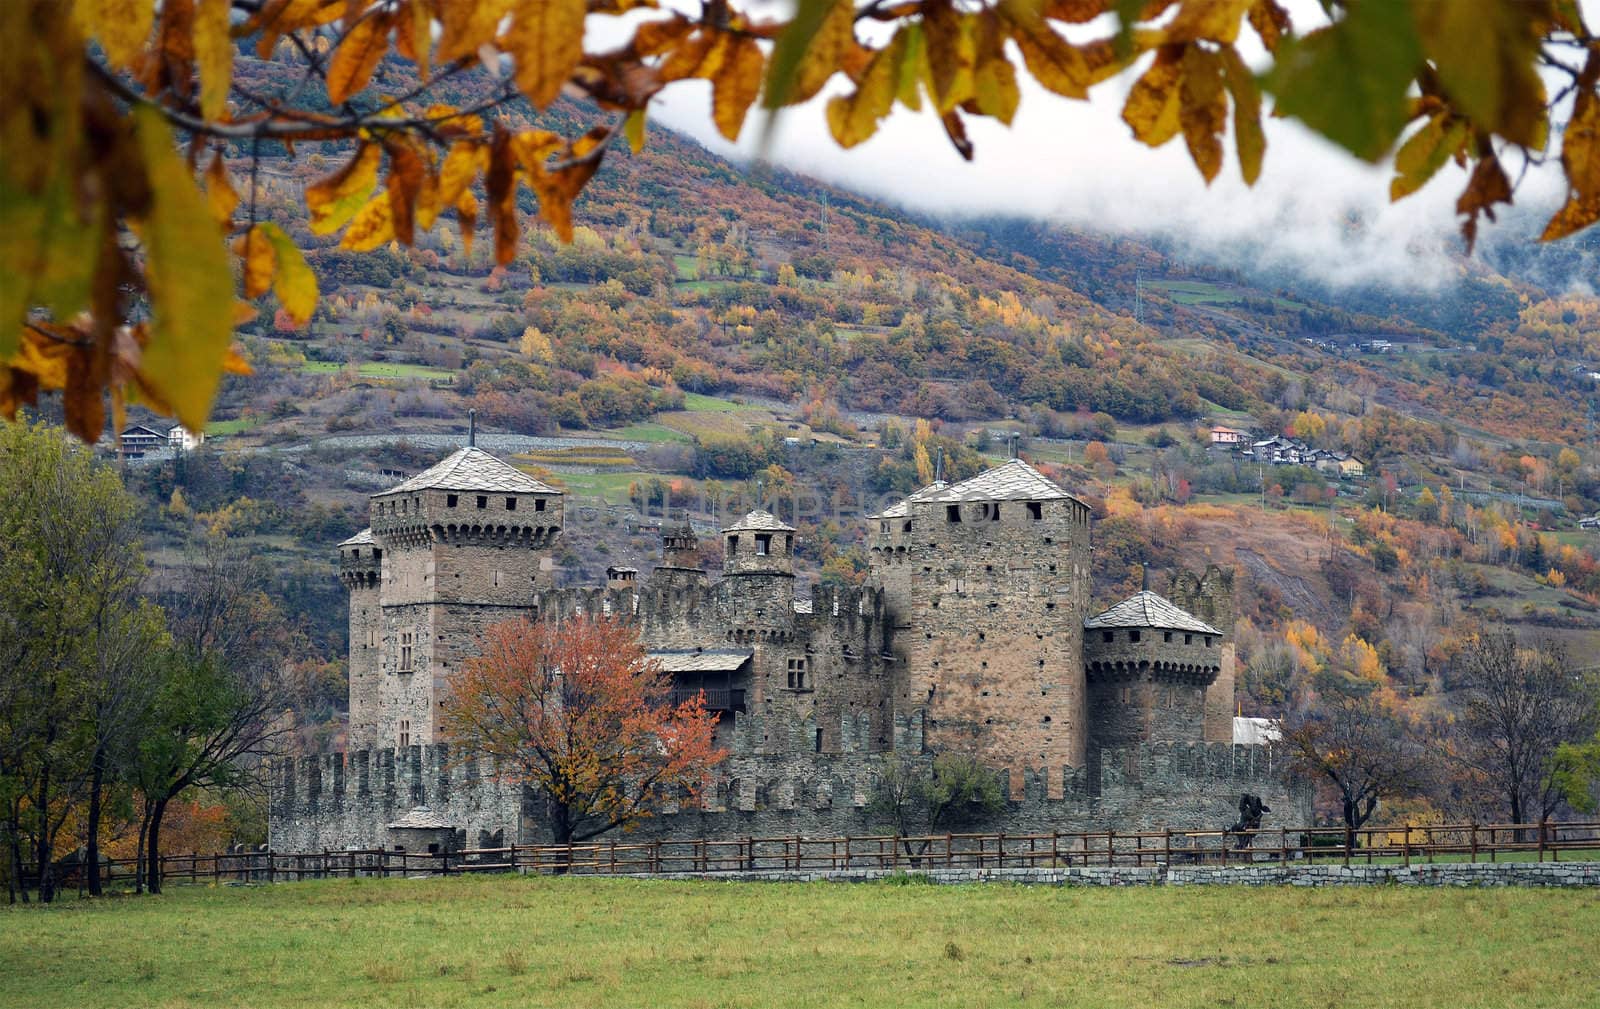 View of the Fenis castle in northern Italy in autumn